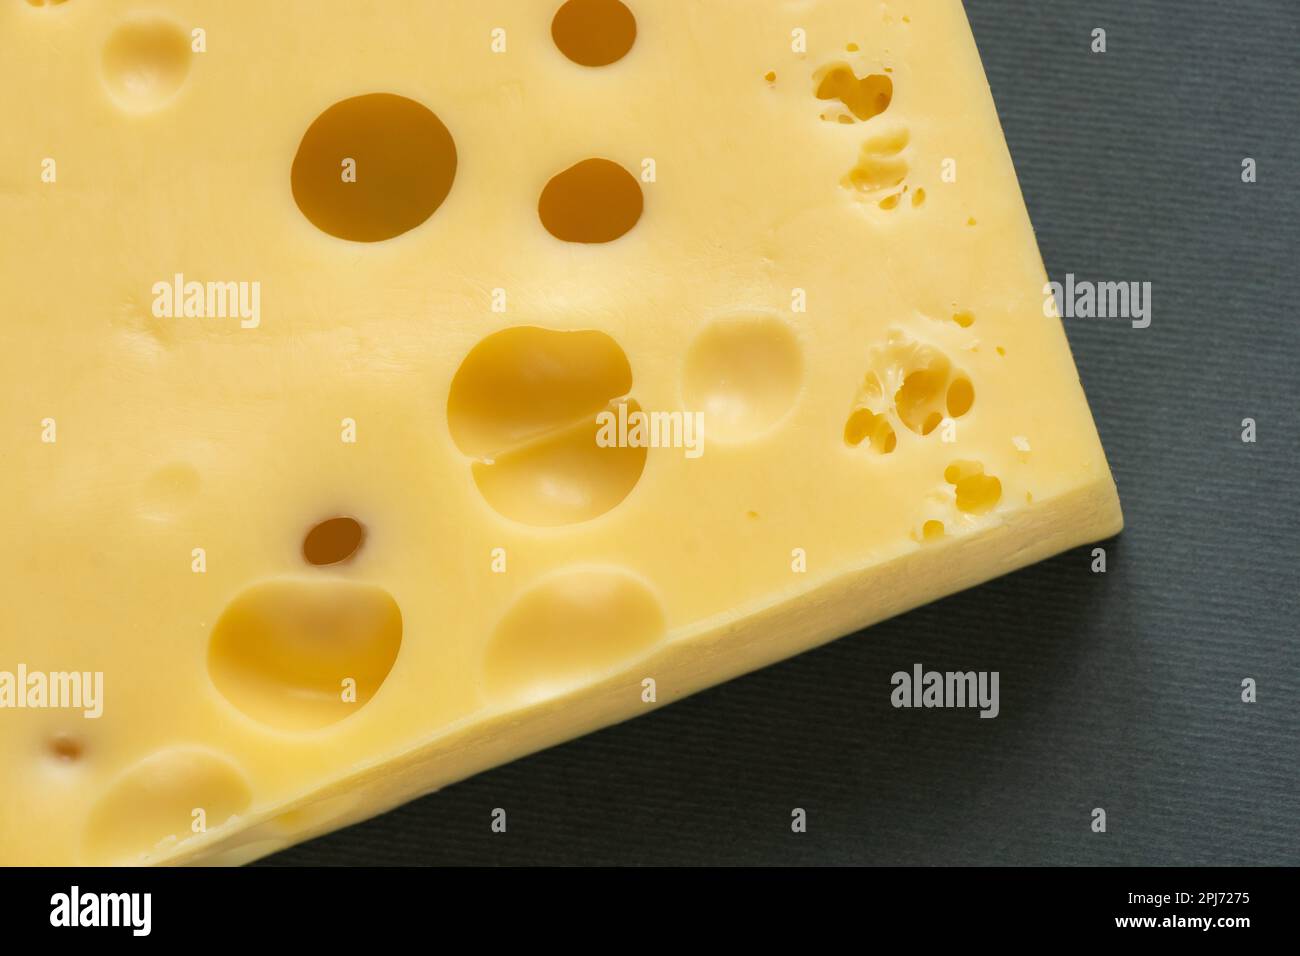 piece of cheese on a gray background close-up Stock Photo